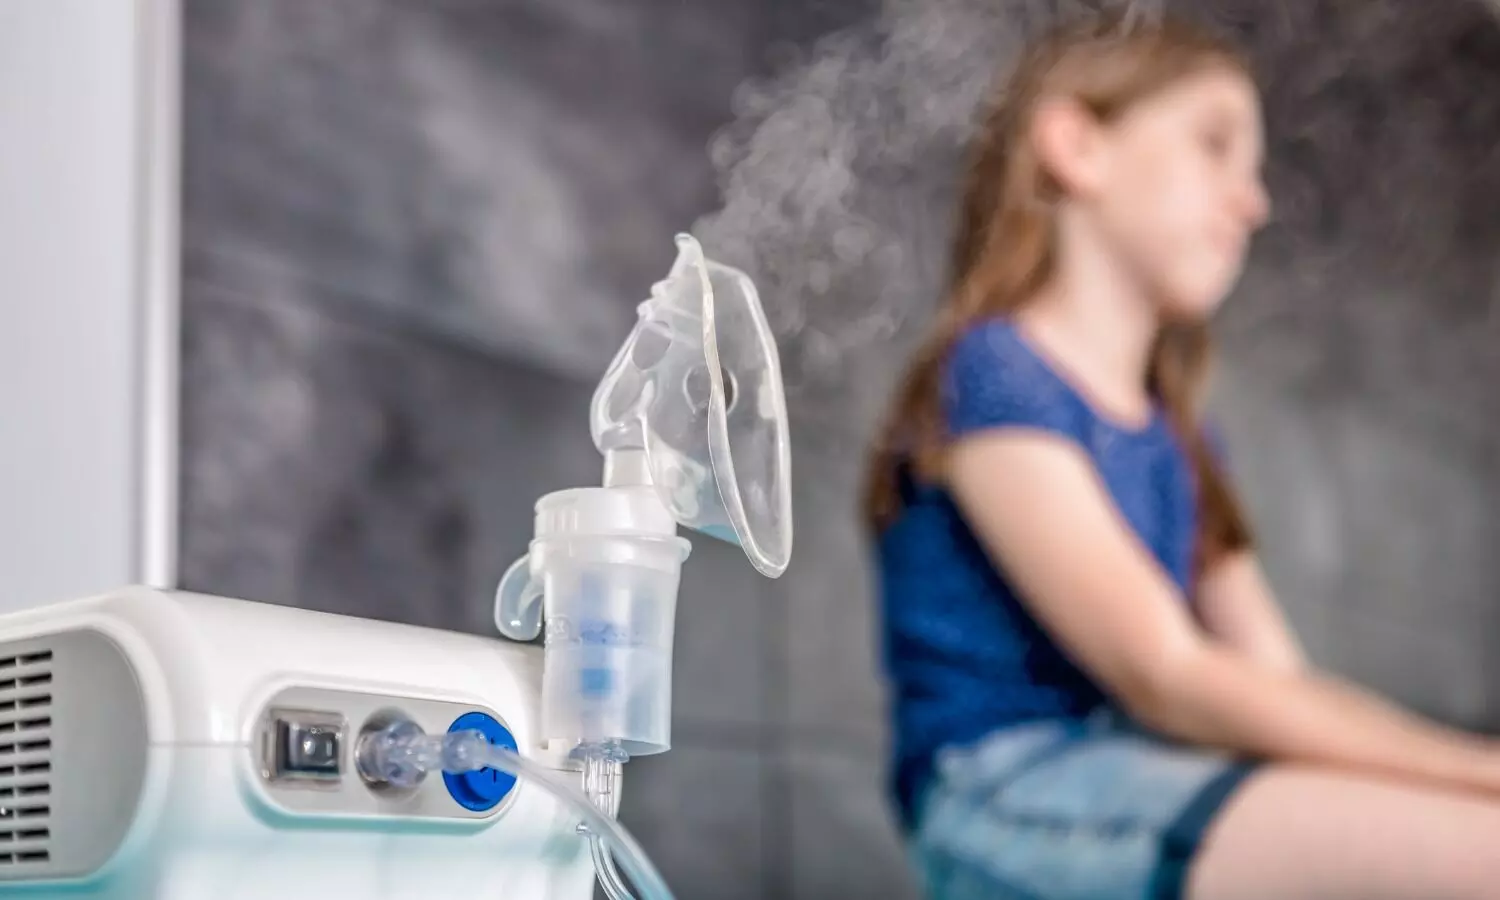 For pain relief Efficacy of Nebulized ketamine same with different doses: Study